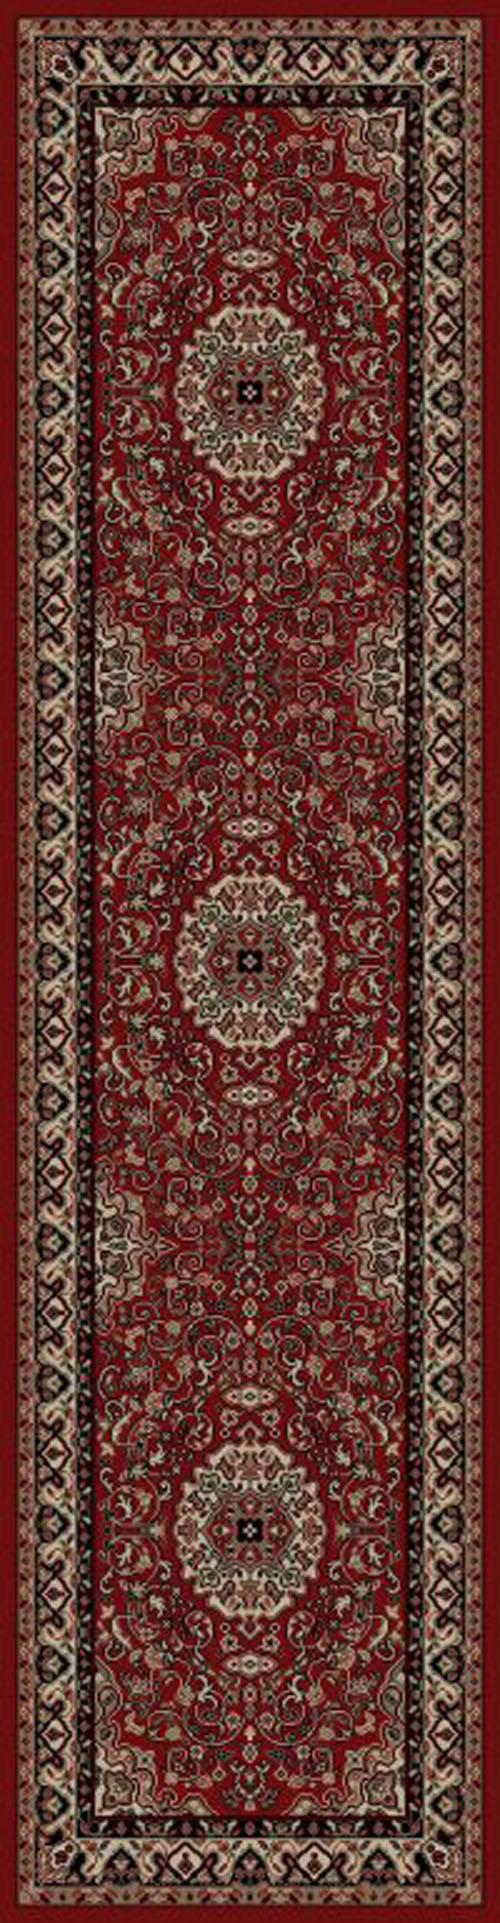 Concord Global Persian Classics ISFAHAN RED Rug